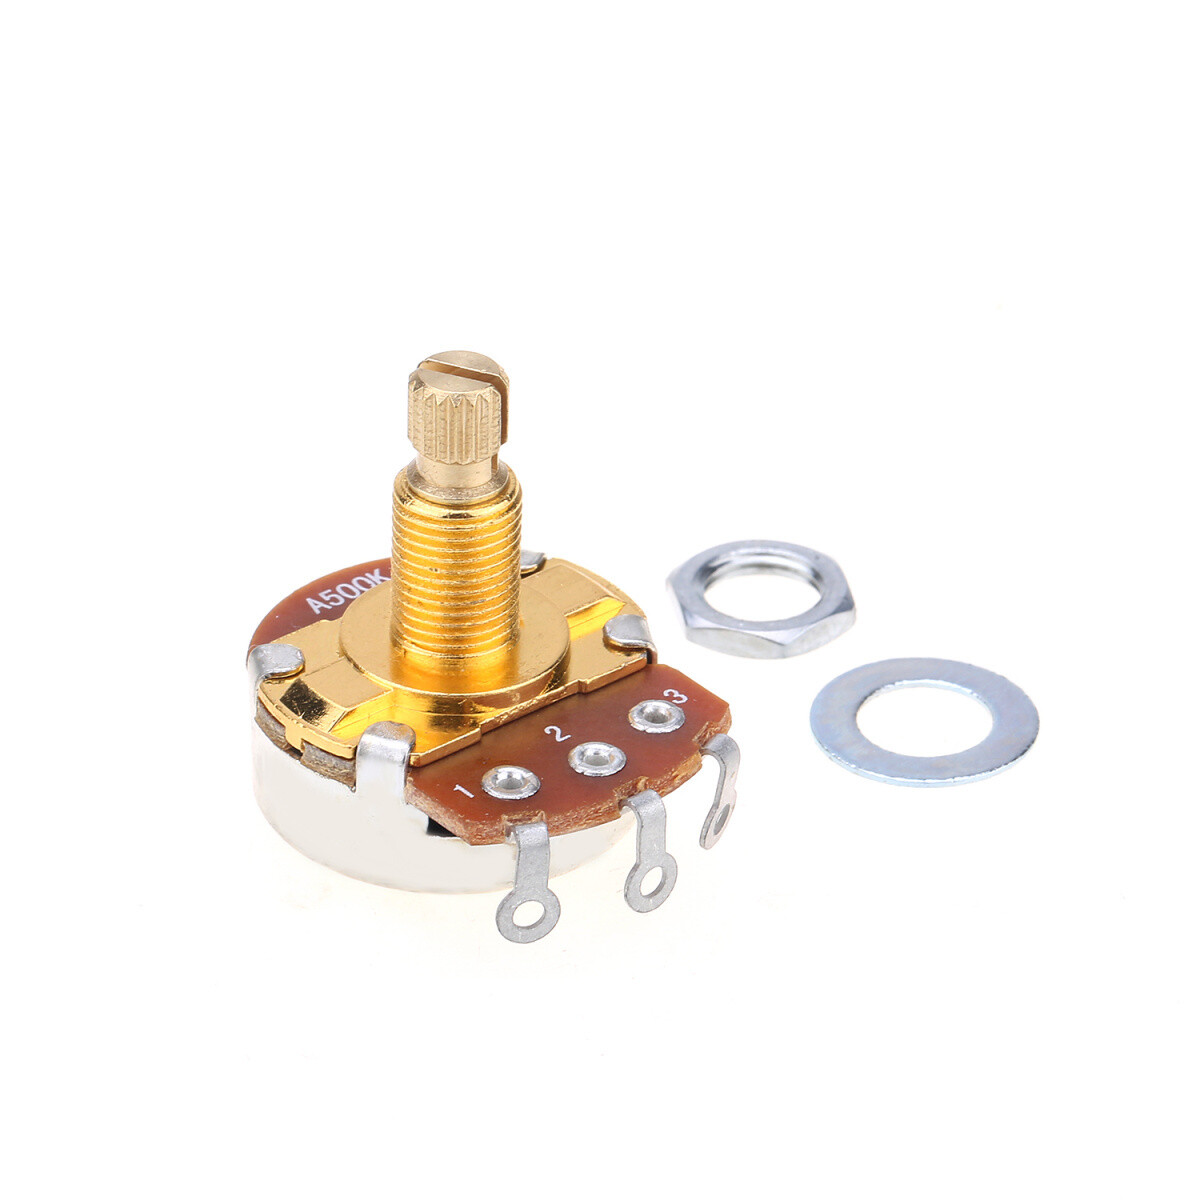 Brio Brass Shaft Full Metric Sized Control Pots A500K Audio Taper Potentiometers for Guitar